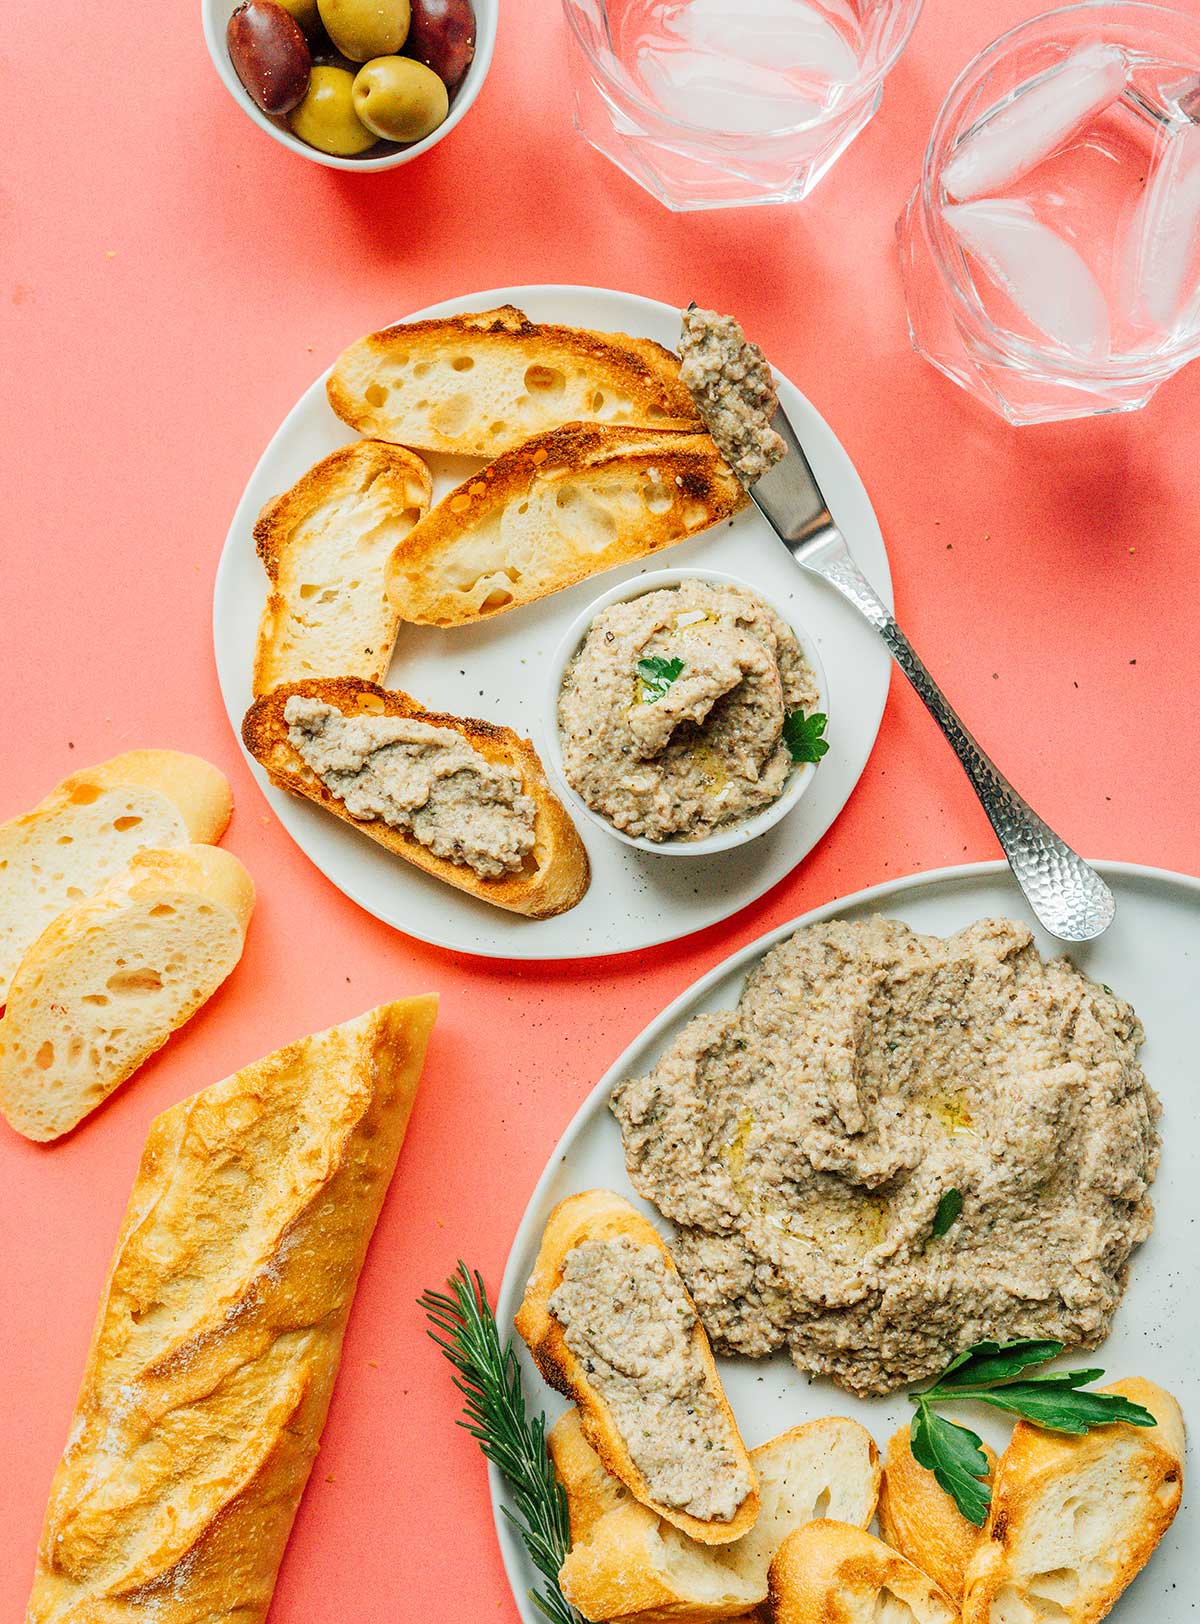 A small bowl of mushroom pâté on a white plate with slices of French bread